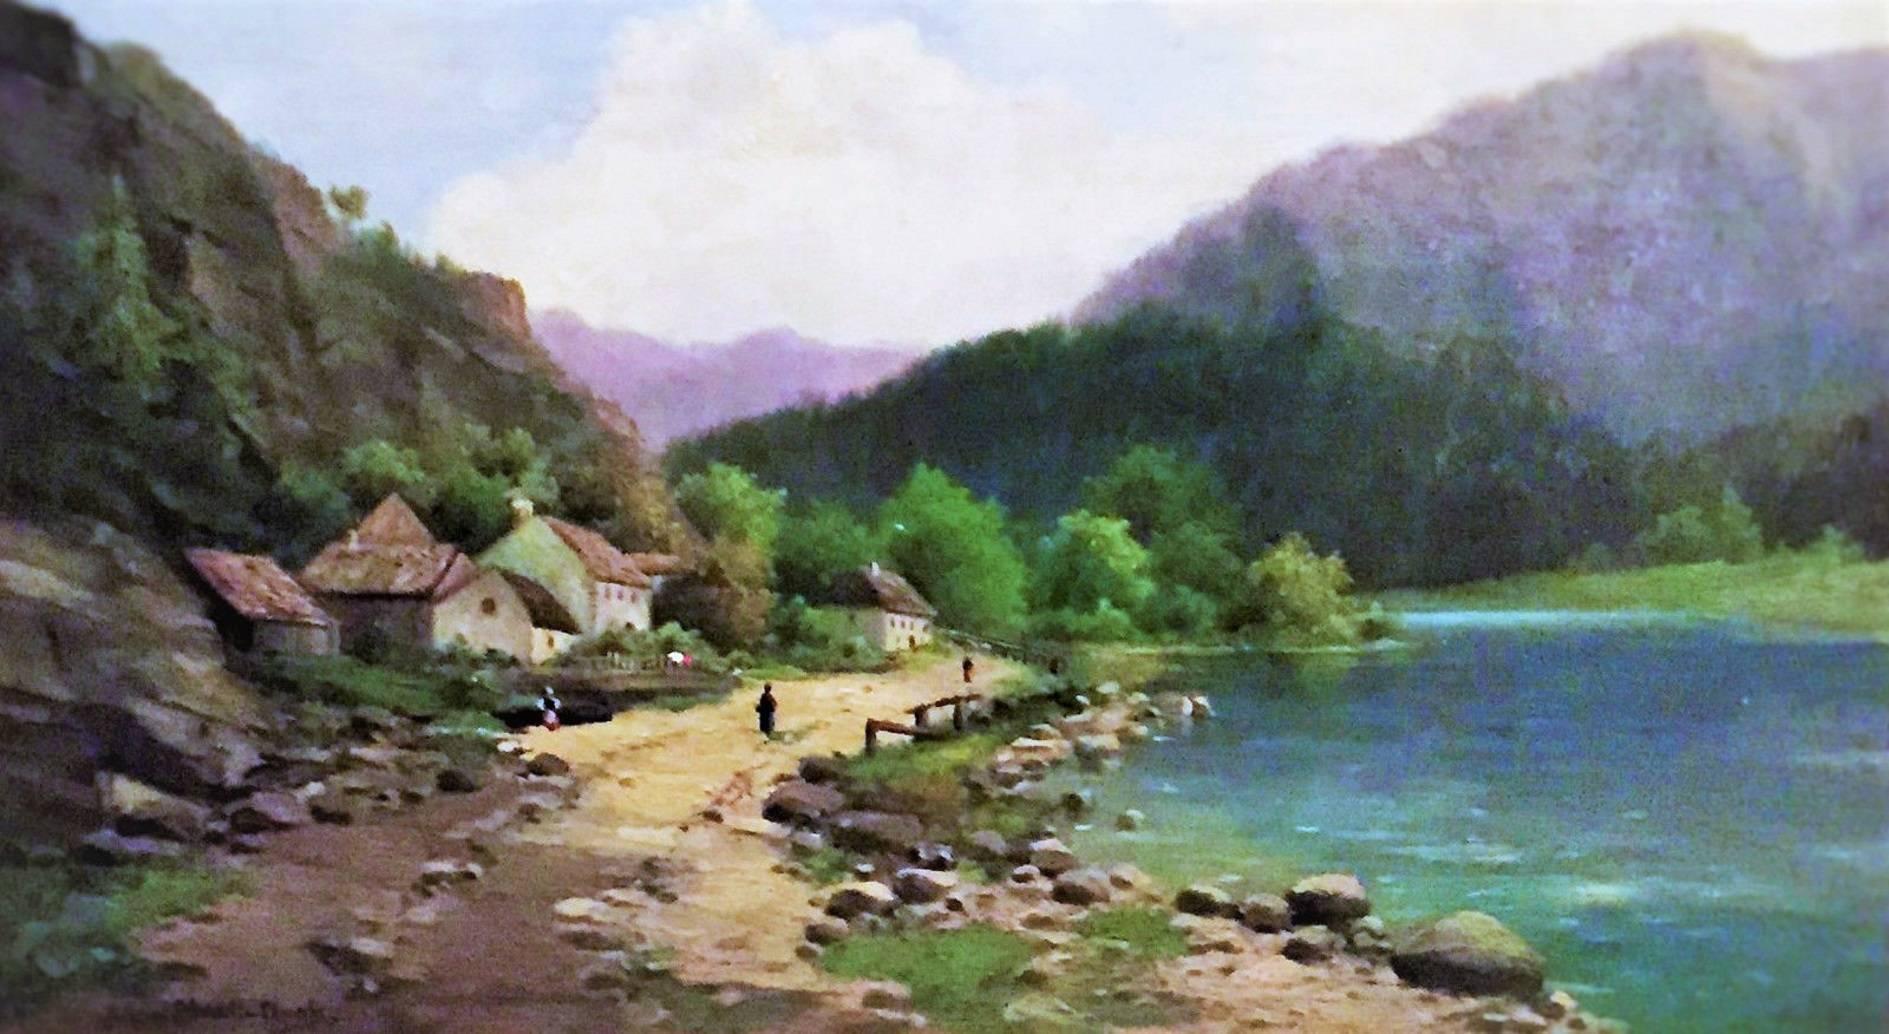 Signed: Poldine Schmidt-Chwala.
Painted in the best traditions of the era of European realism paintings of the second half of the 19th century, this beautiful Austrian mountain village landscape is rendered in oil on board, with the precision of a